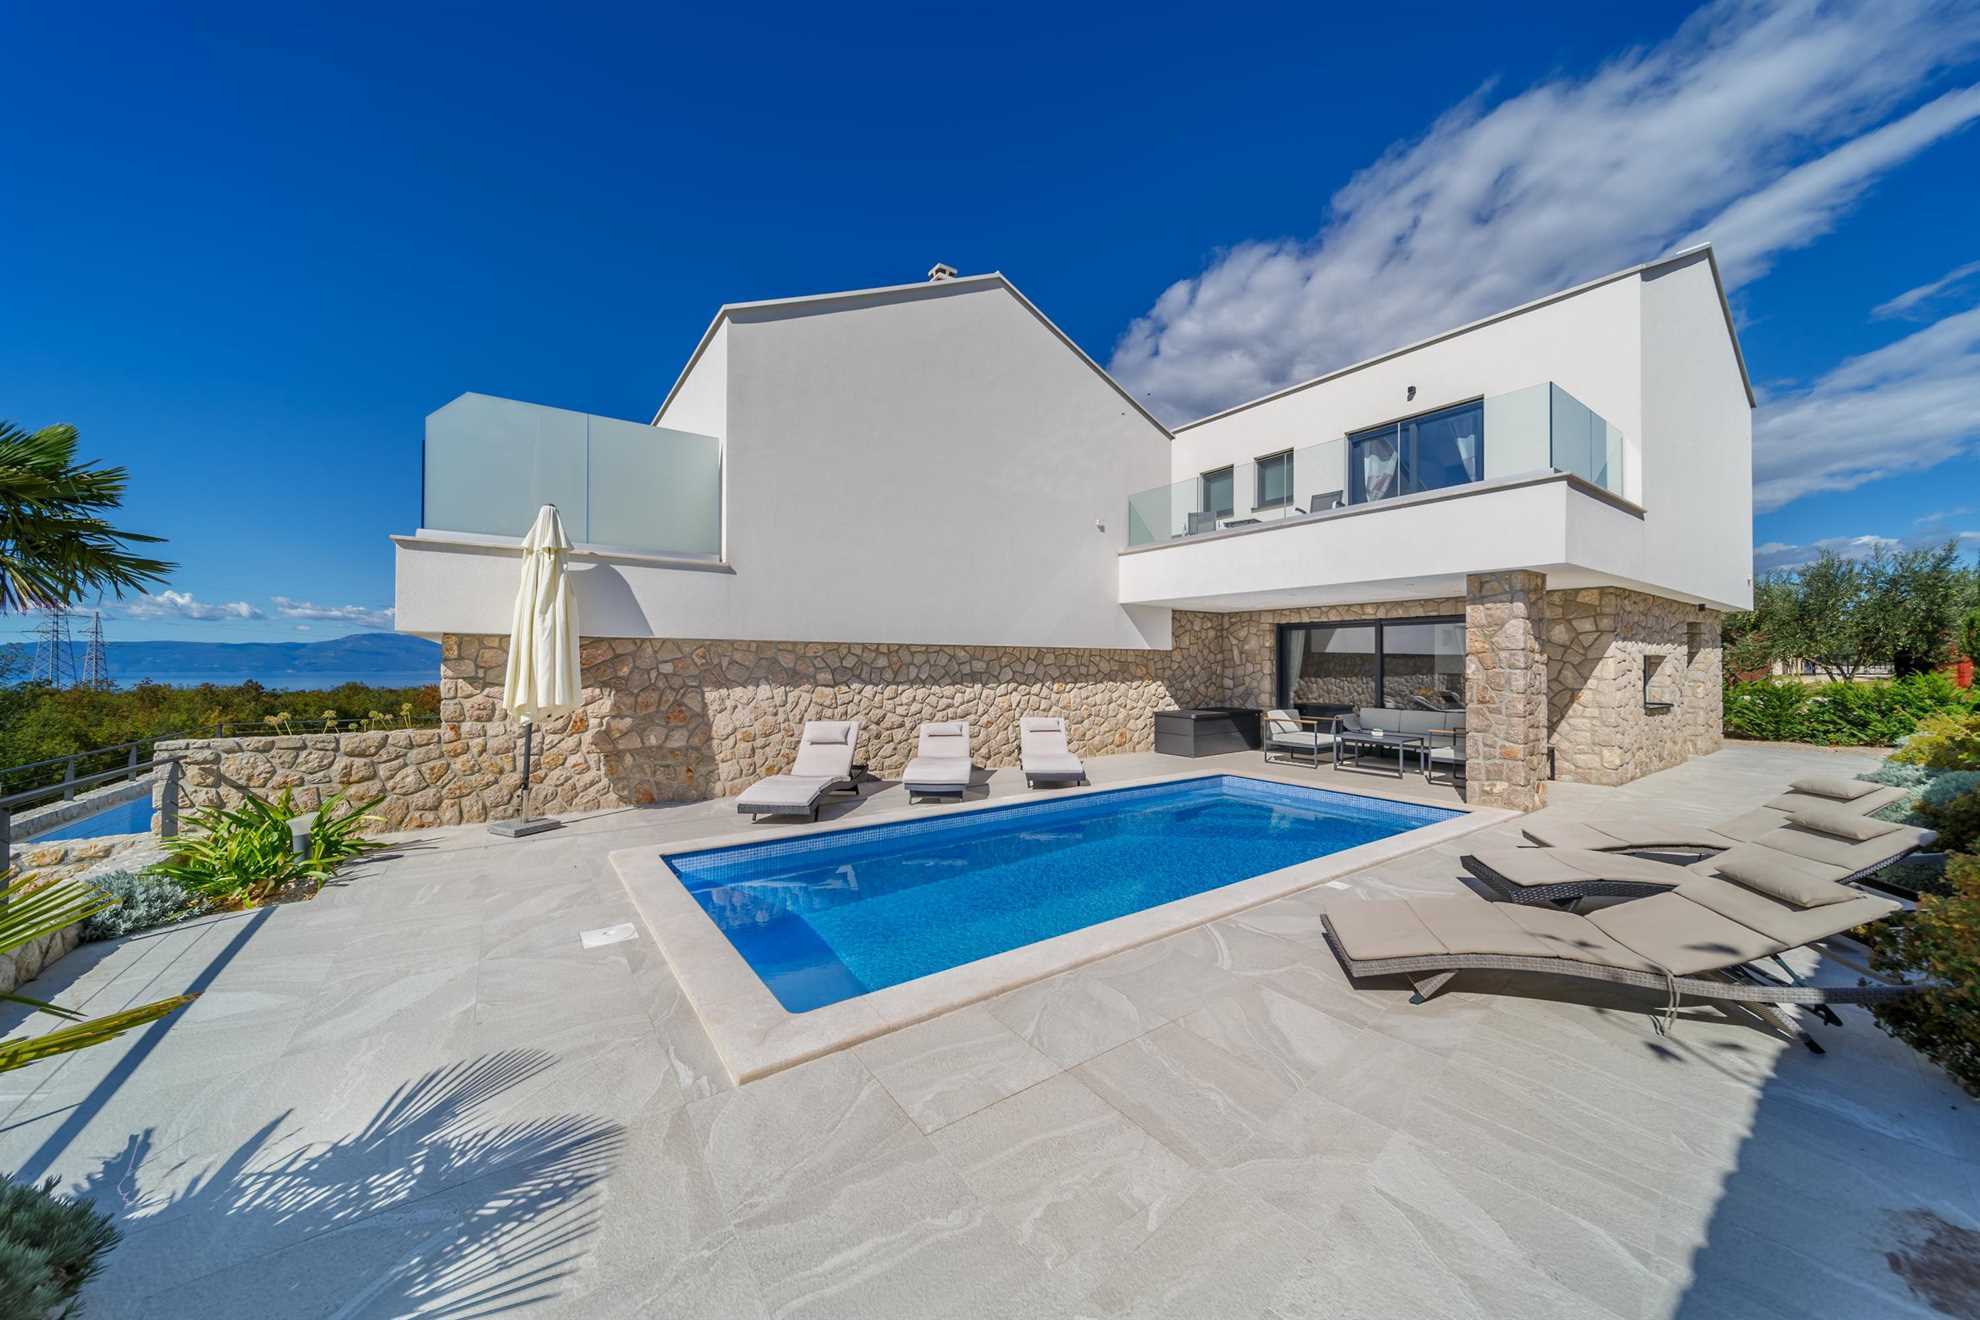 Luxury villa with a swimming pool and sun loungers.